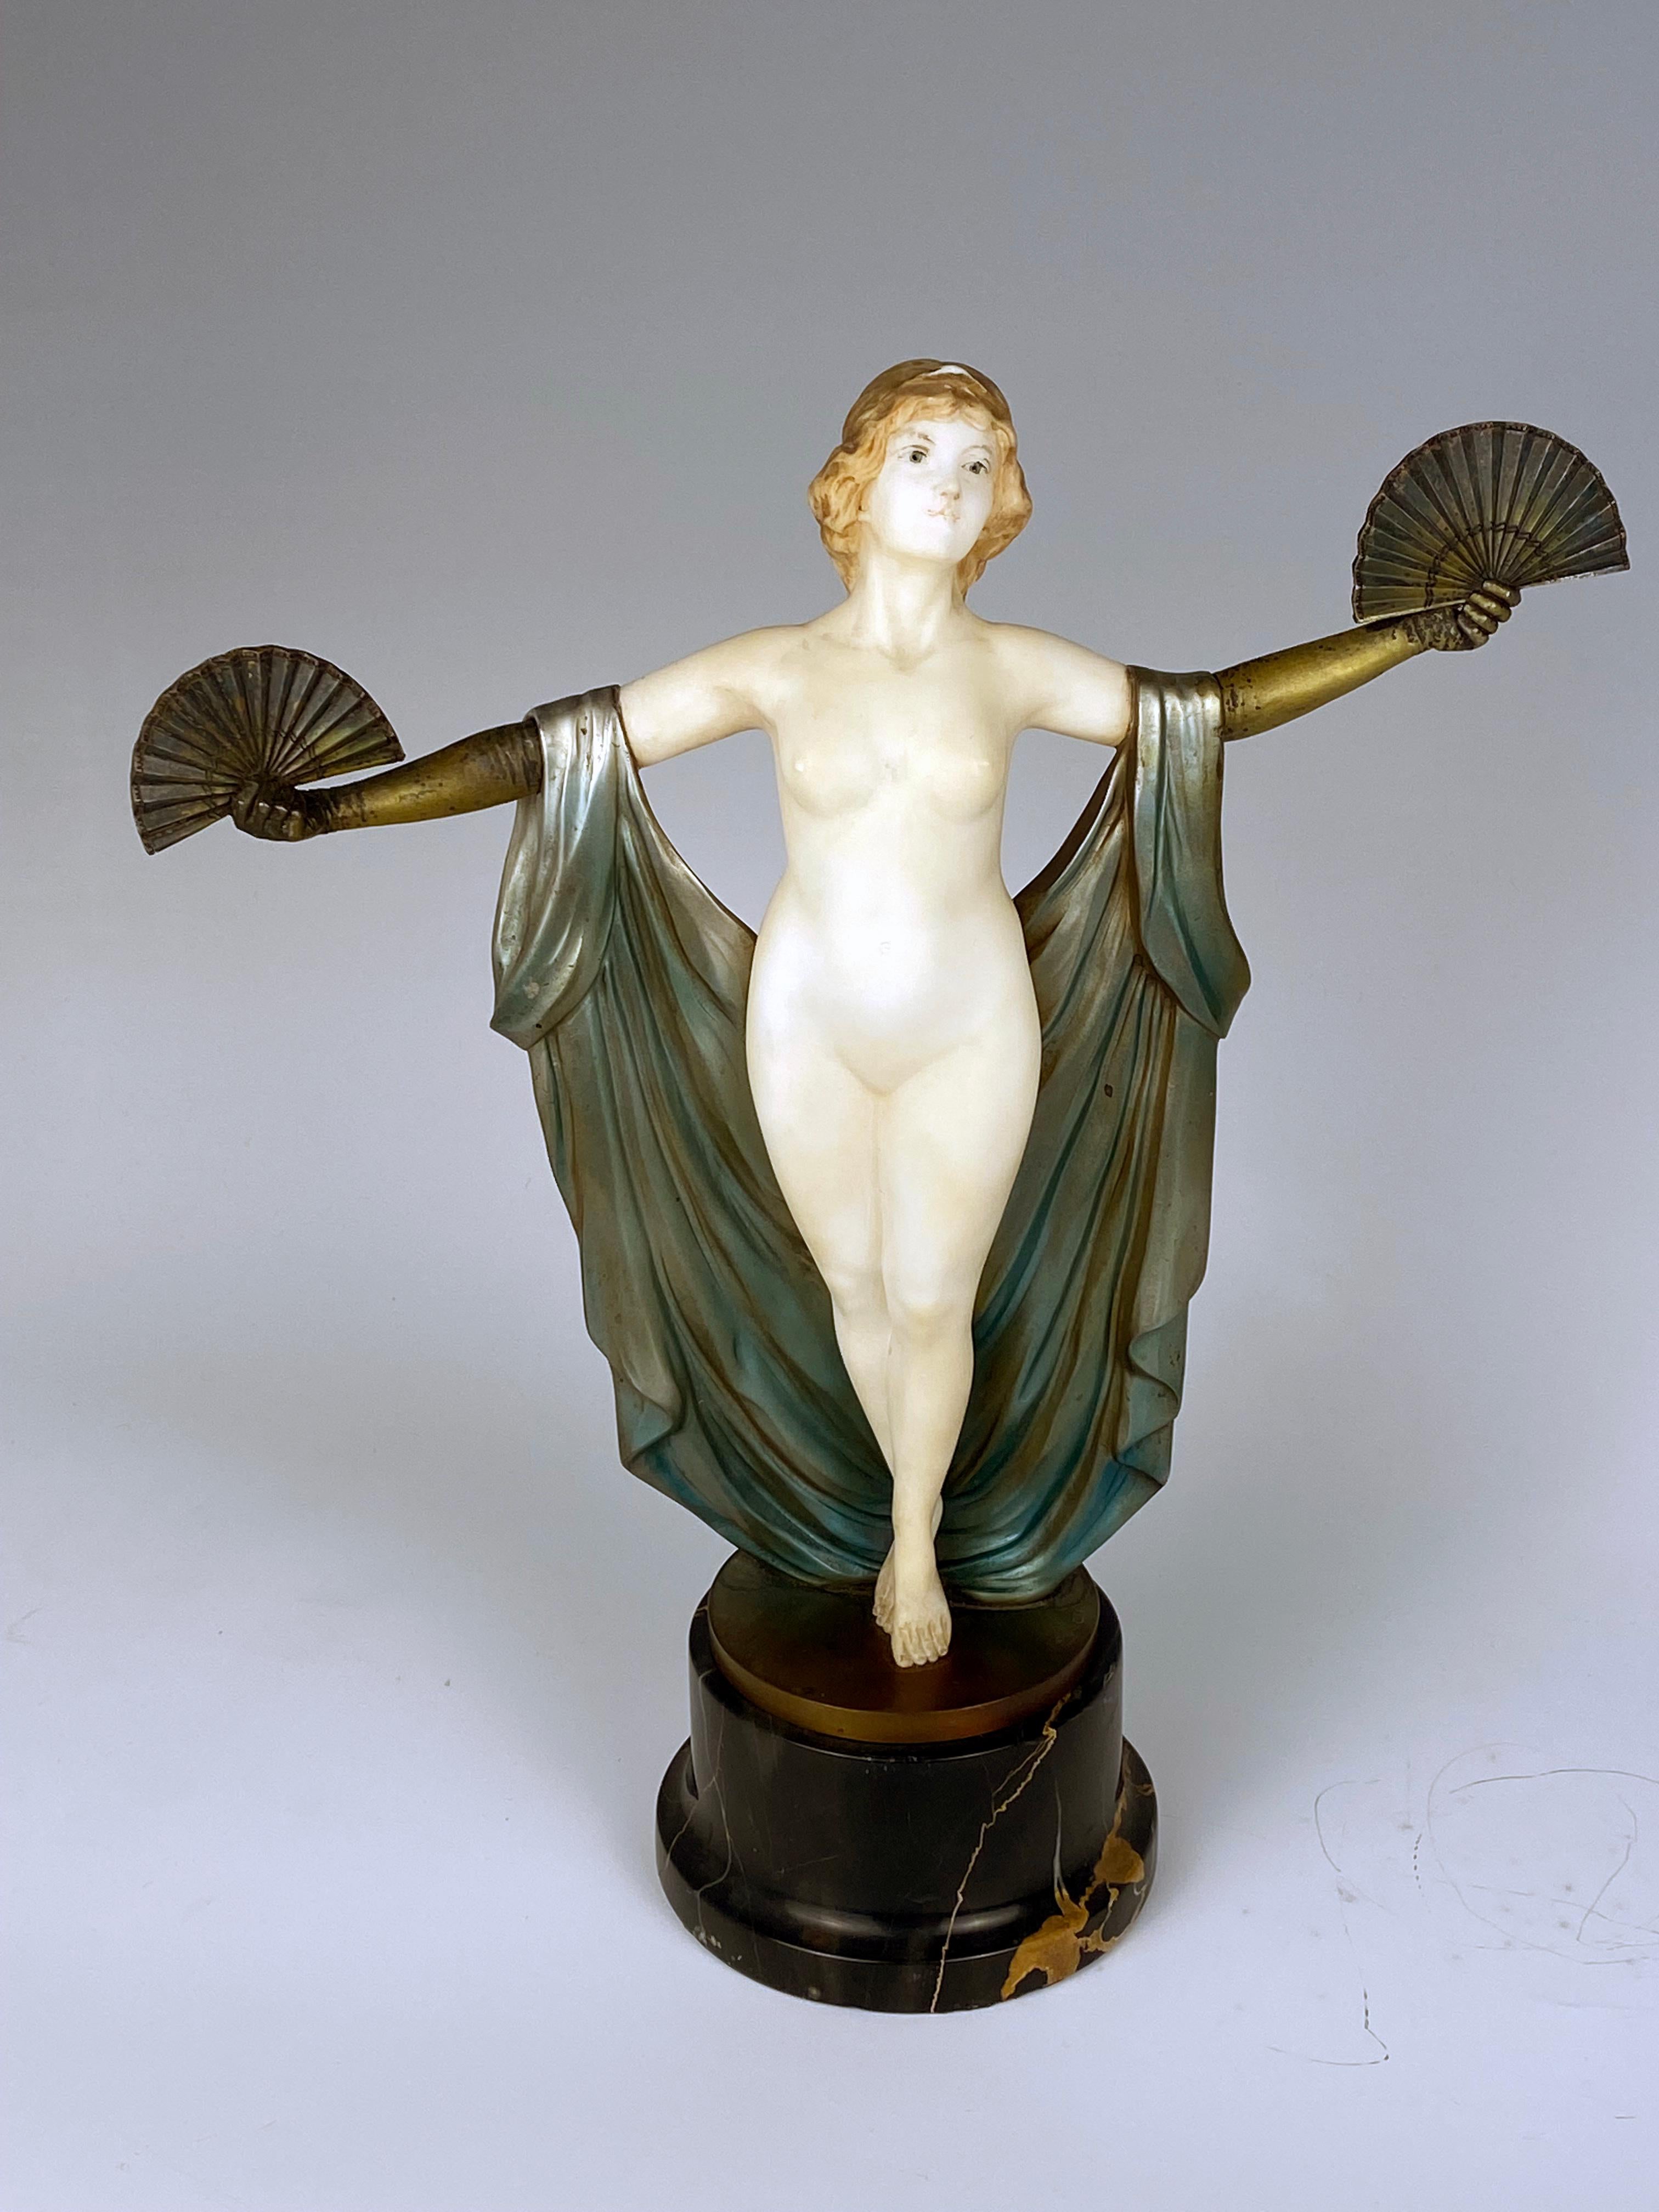 Art Deco sculpture made of carved white marble and casted bronze depicting a female dancing with fans.
Made in France
Circa: 1920
Signature: Suteur.